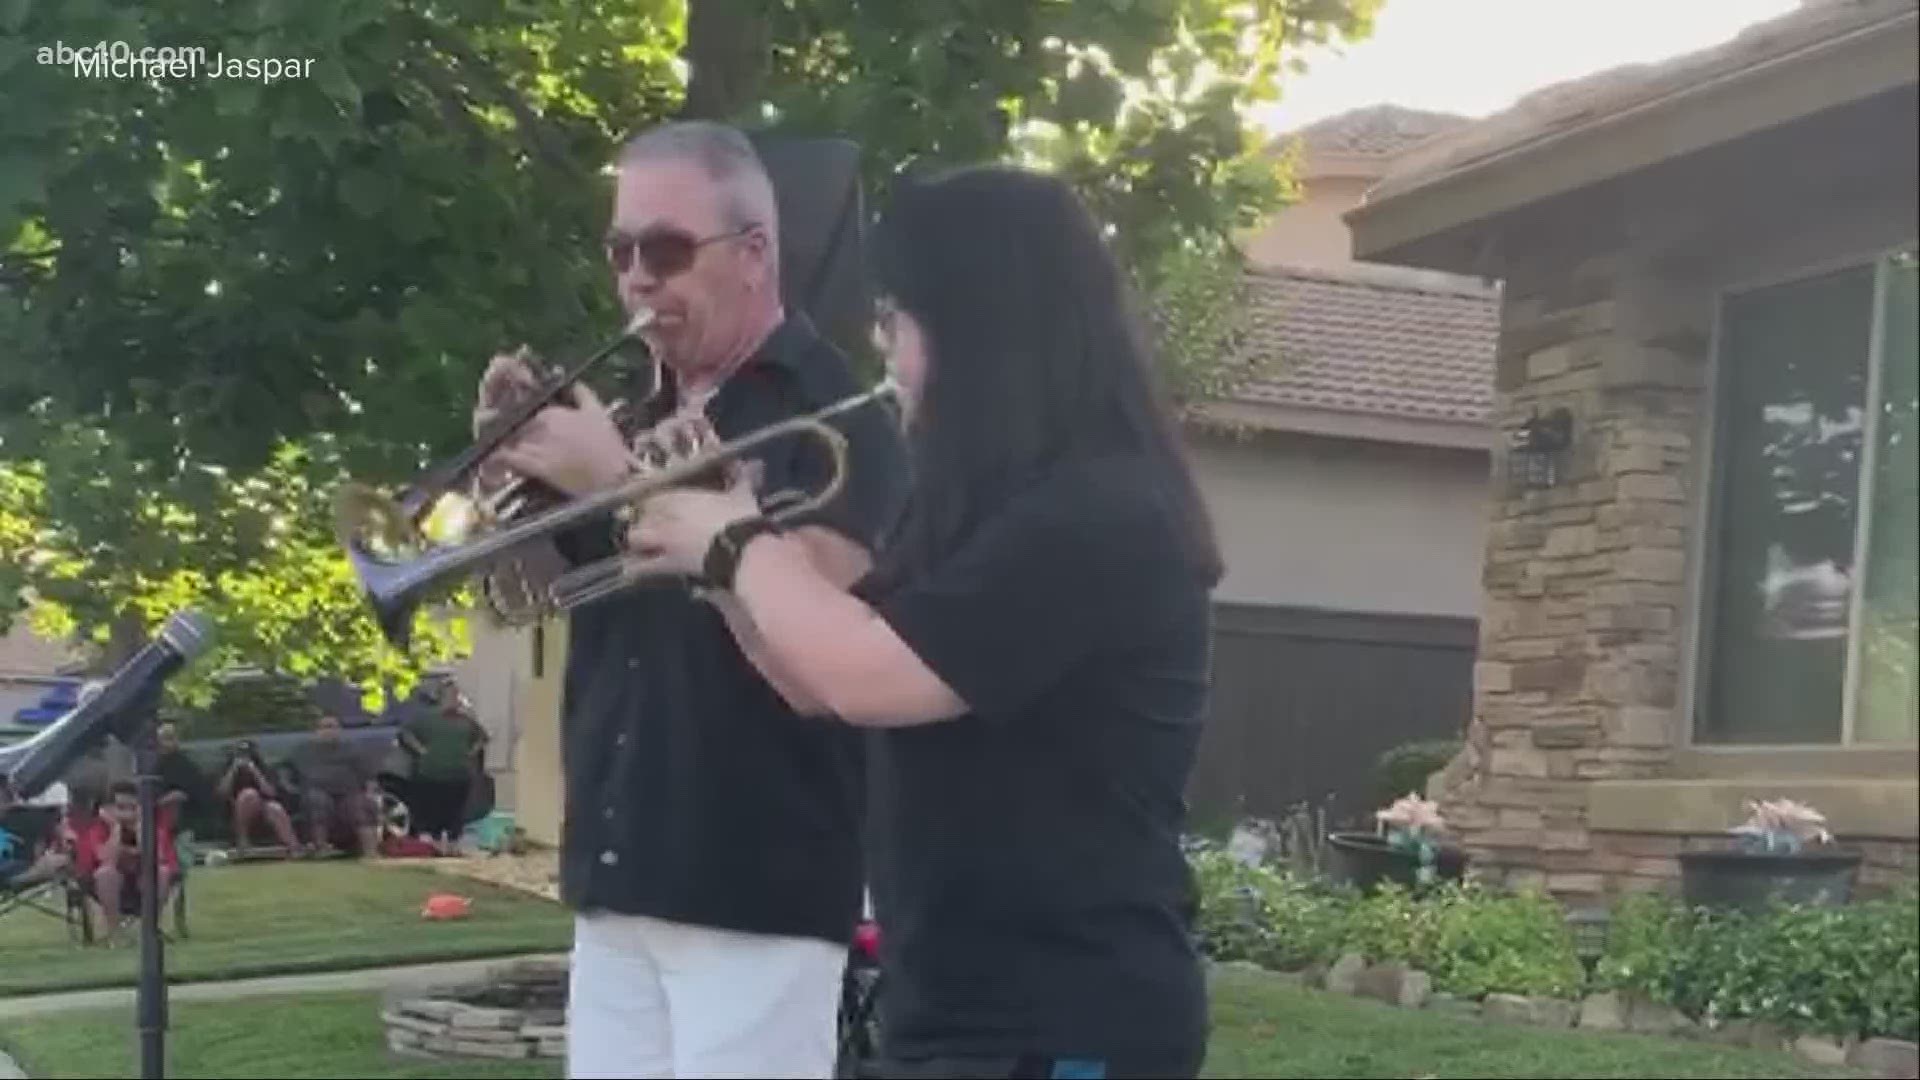 Michael Jaspar and his daughter played for their neighbors in Rancho Cordova while everyone practiced social distancing.